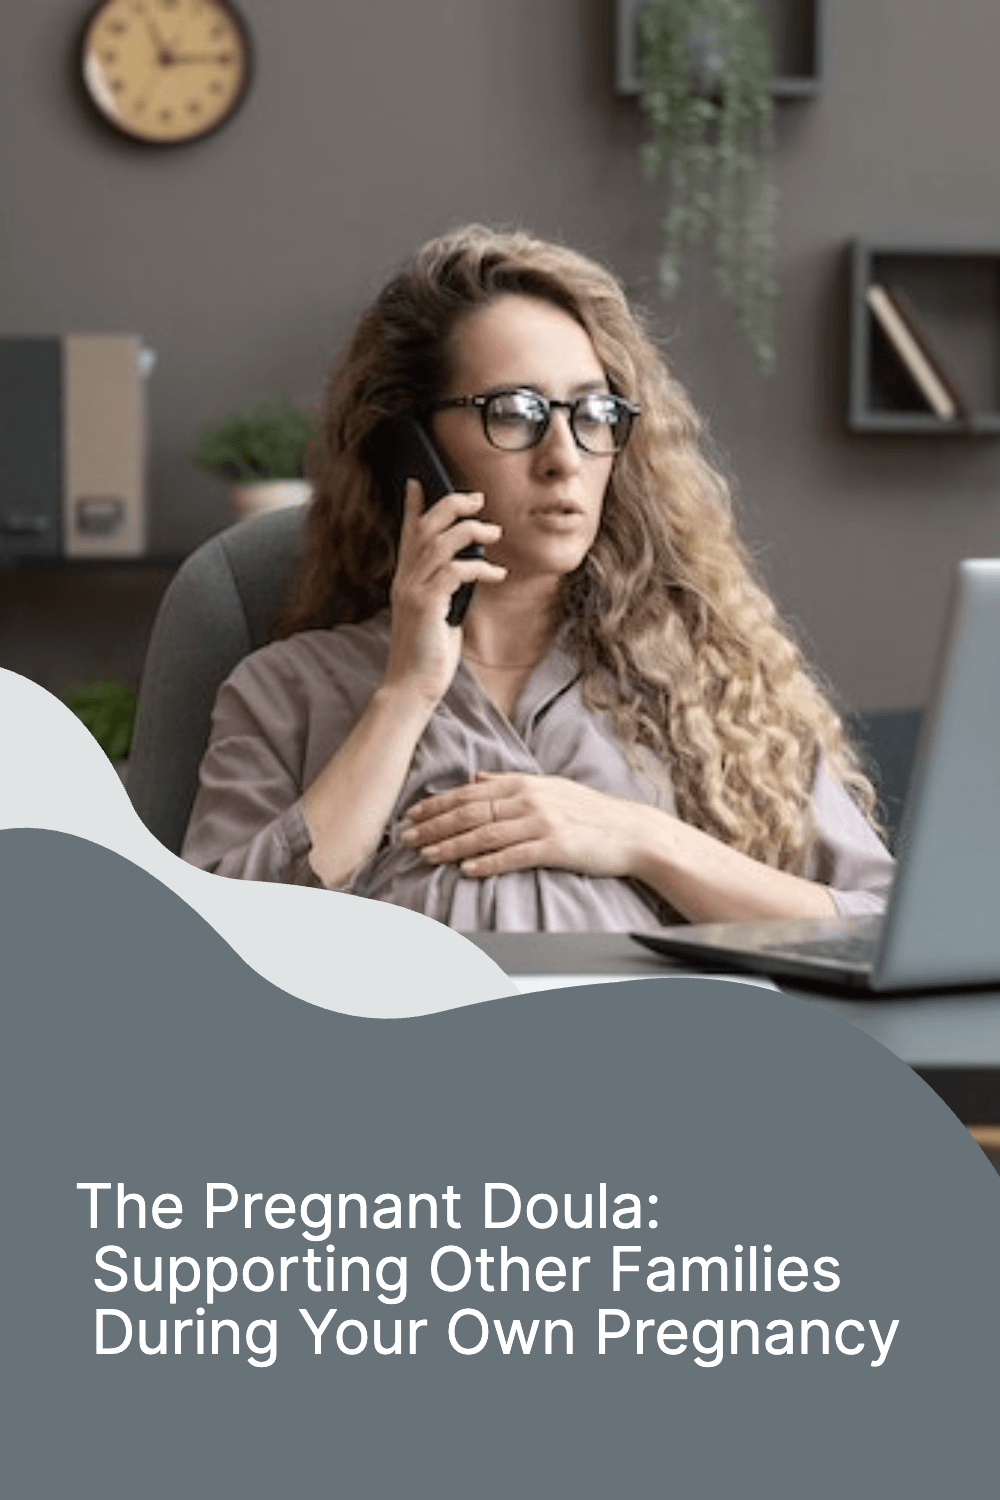 The Pregnant Doula: Supporting Families, Pregnancy